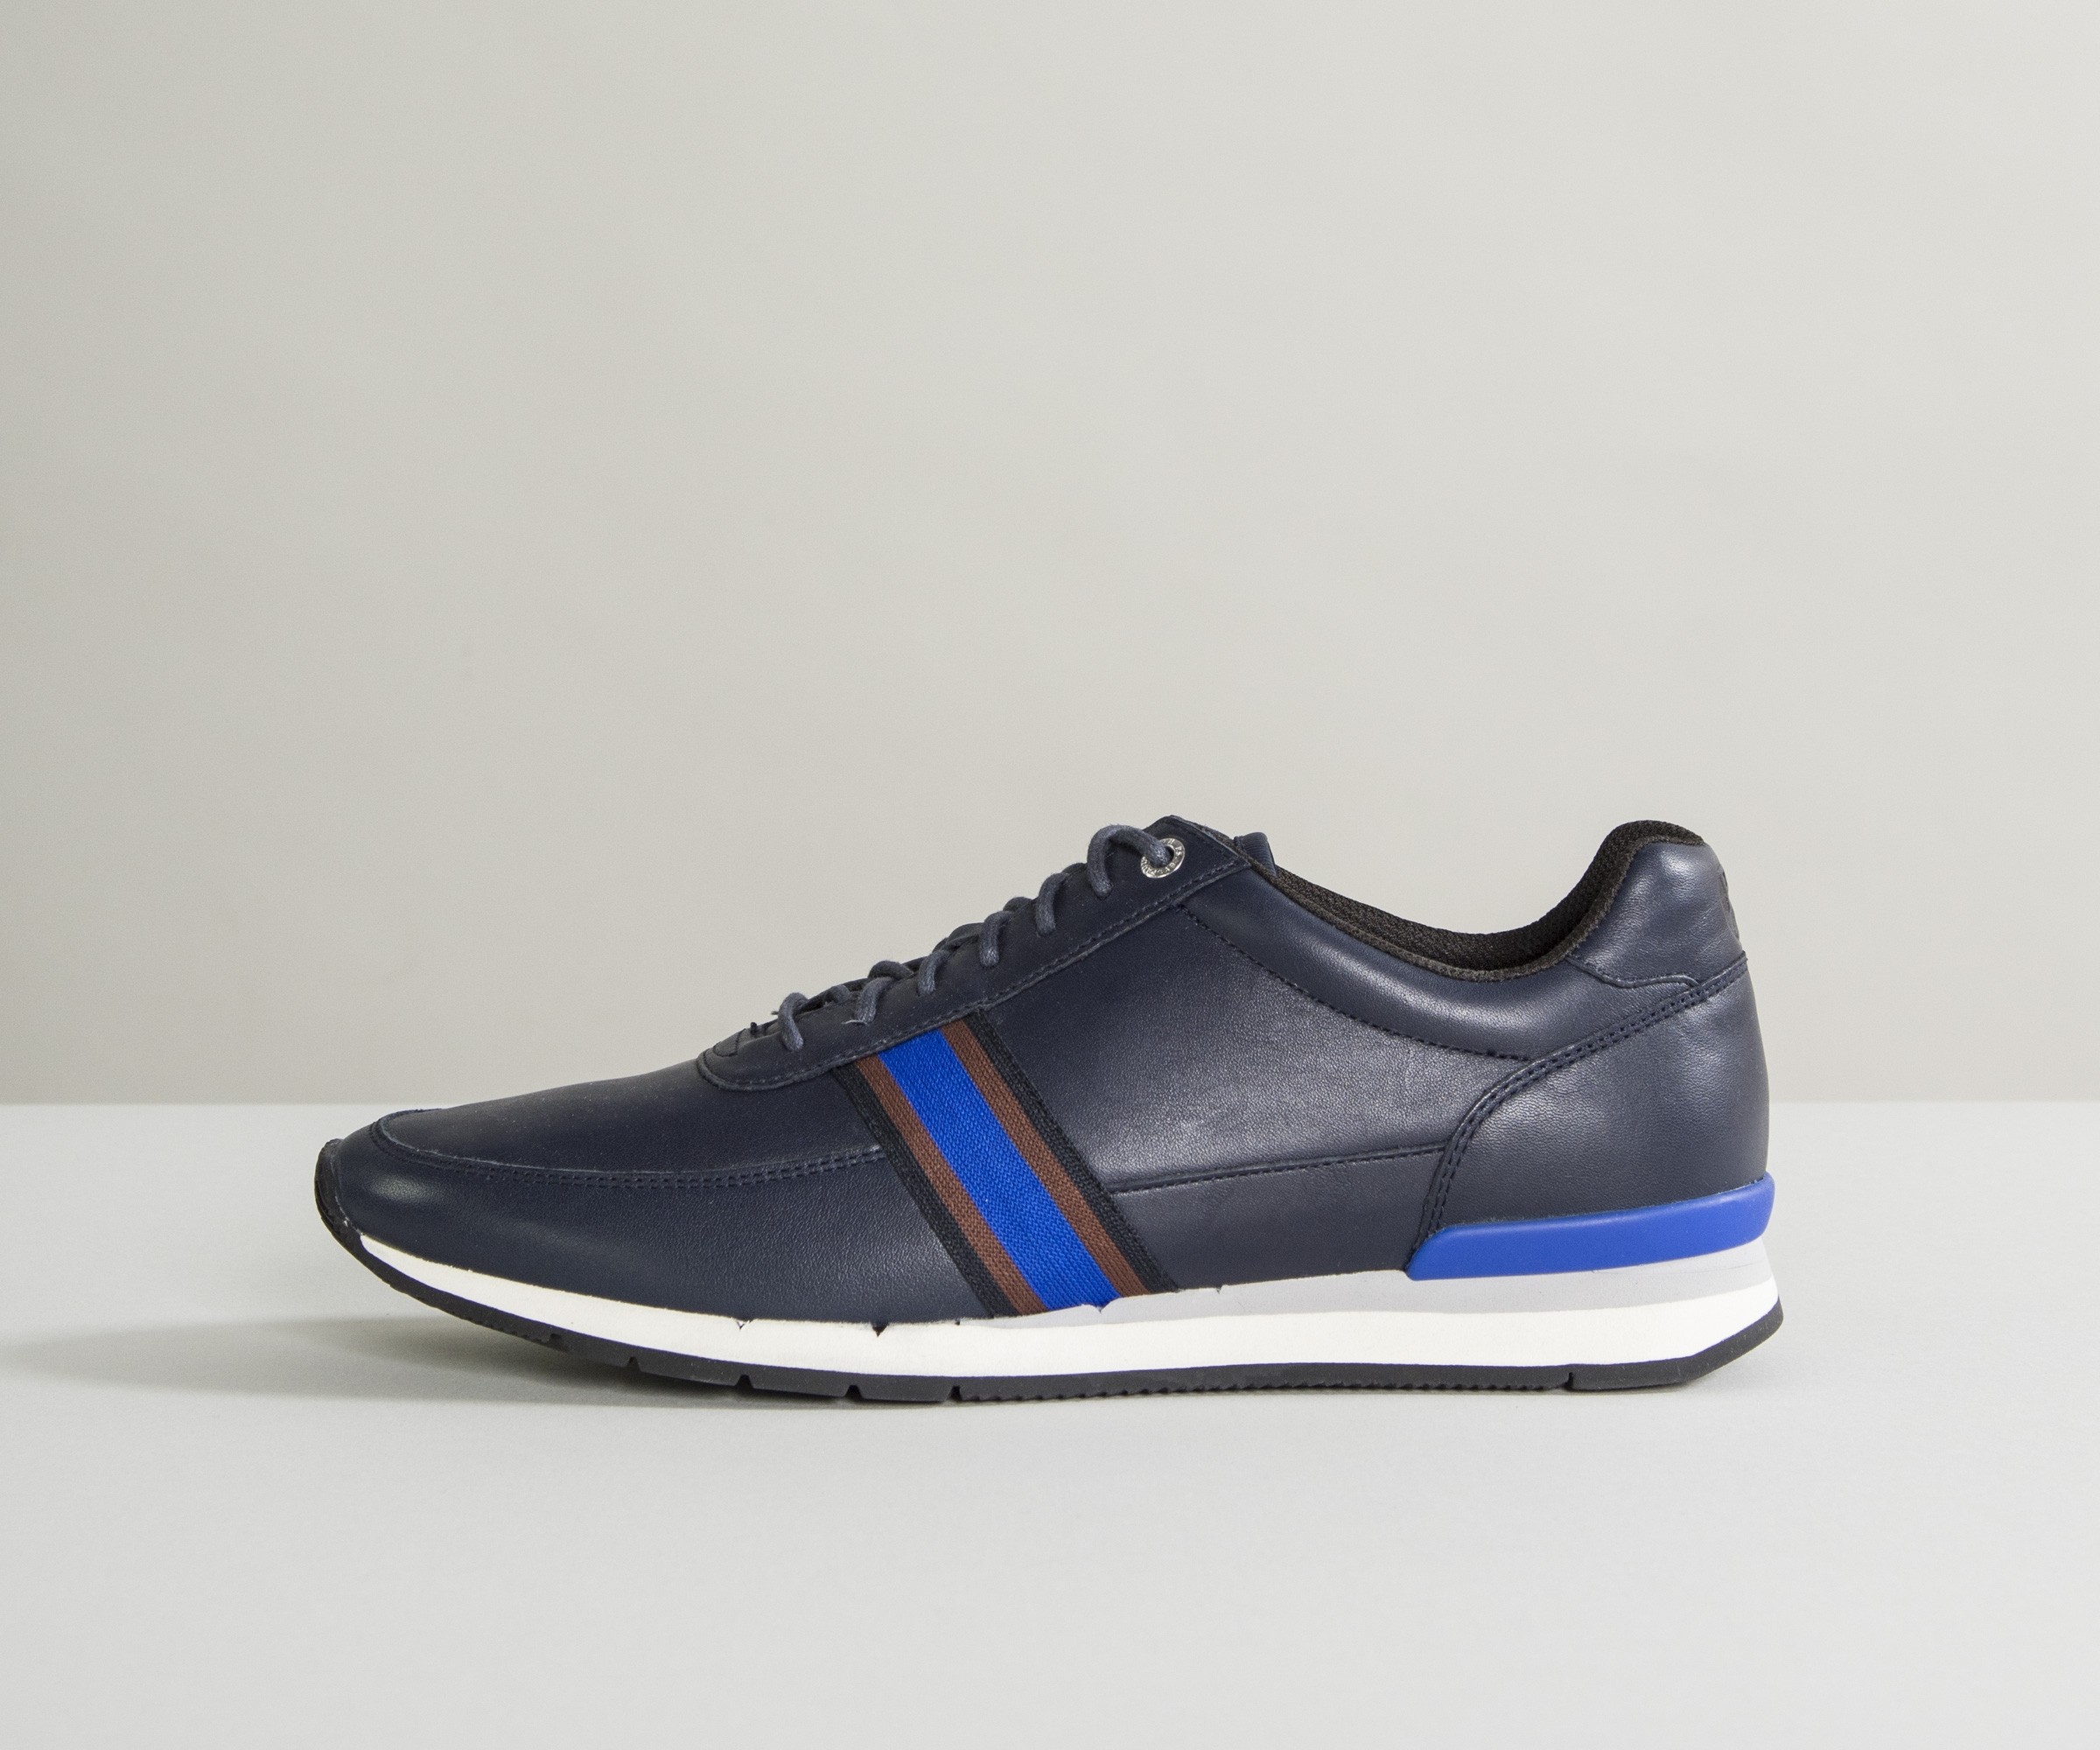 Paul Smith Shoes Swanson Galaxy Mono Leather Running Trainer Navy